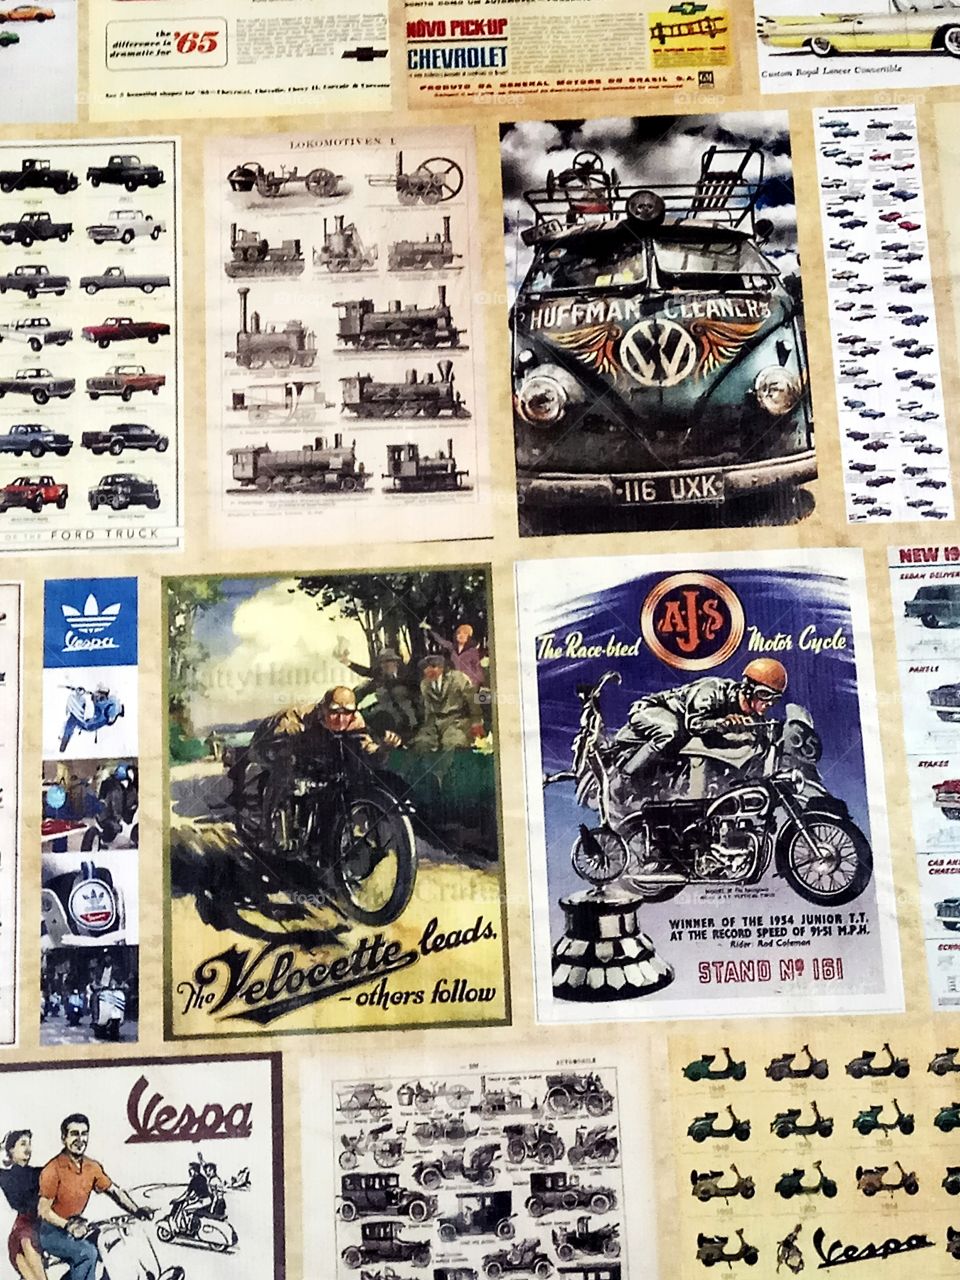 my wall room full of poster vintage car and motorcycle